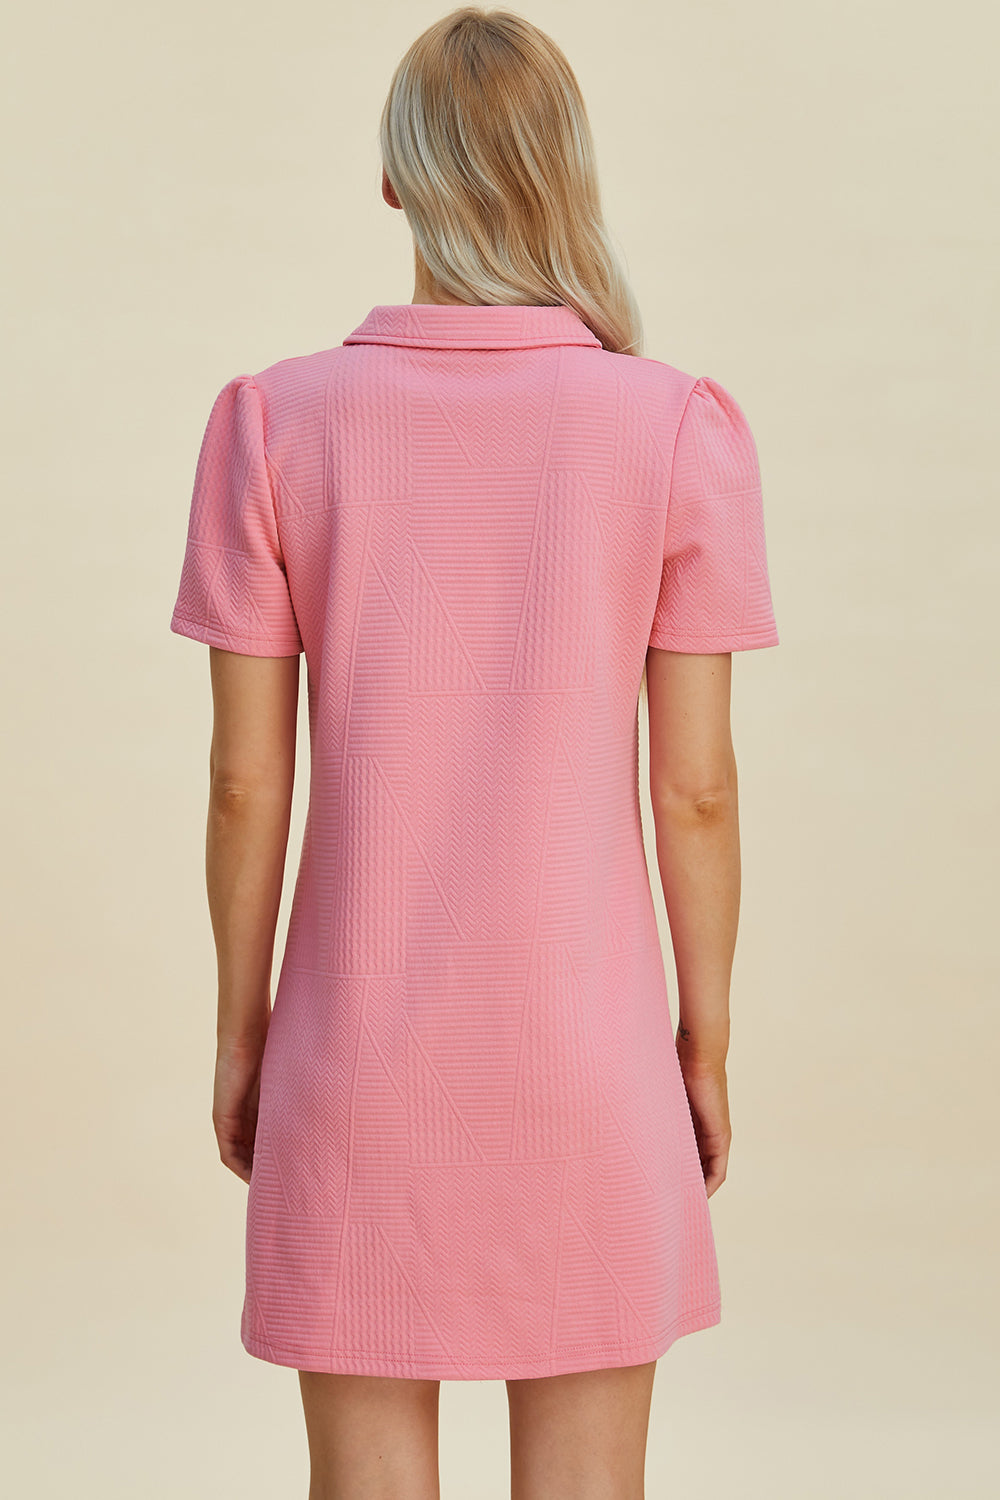 Textured dress in pink, featuring a comfortable fit and stylish design